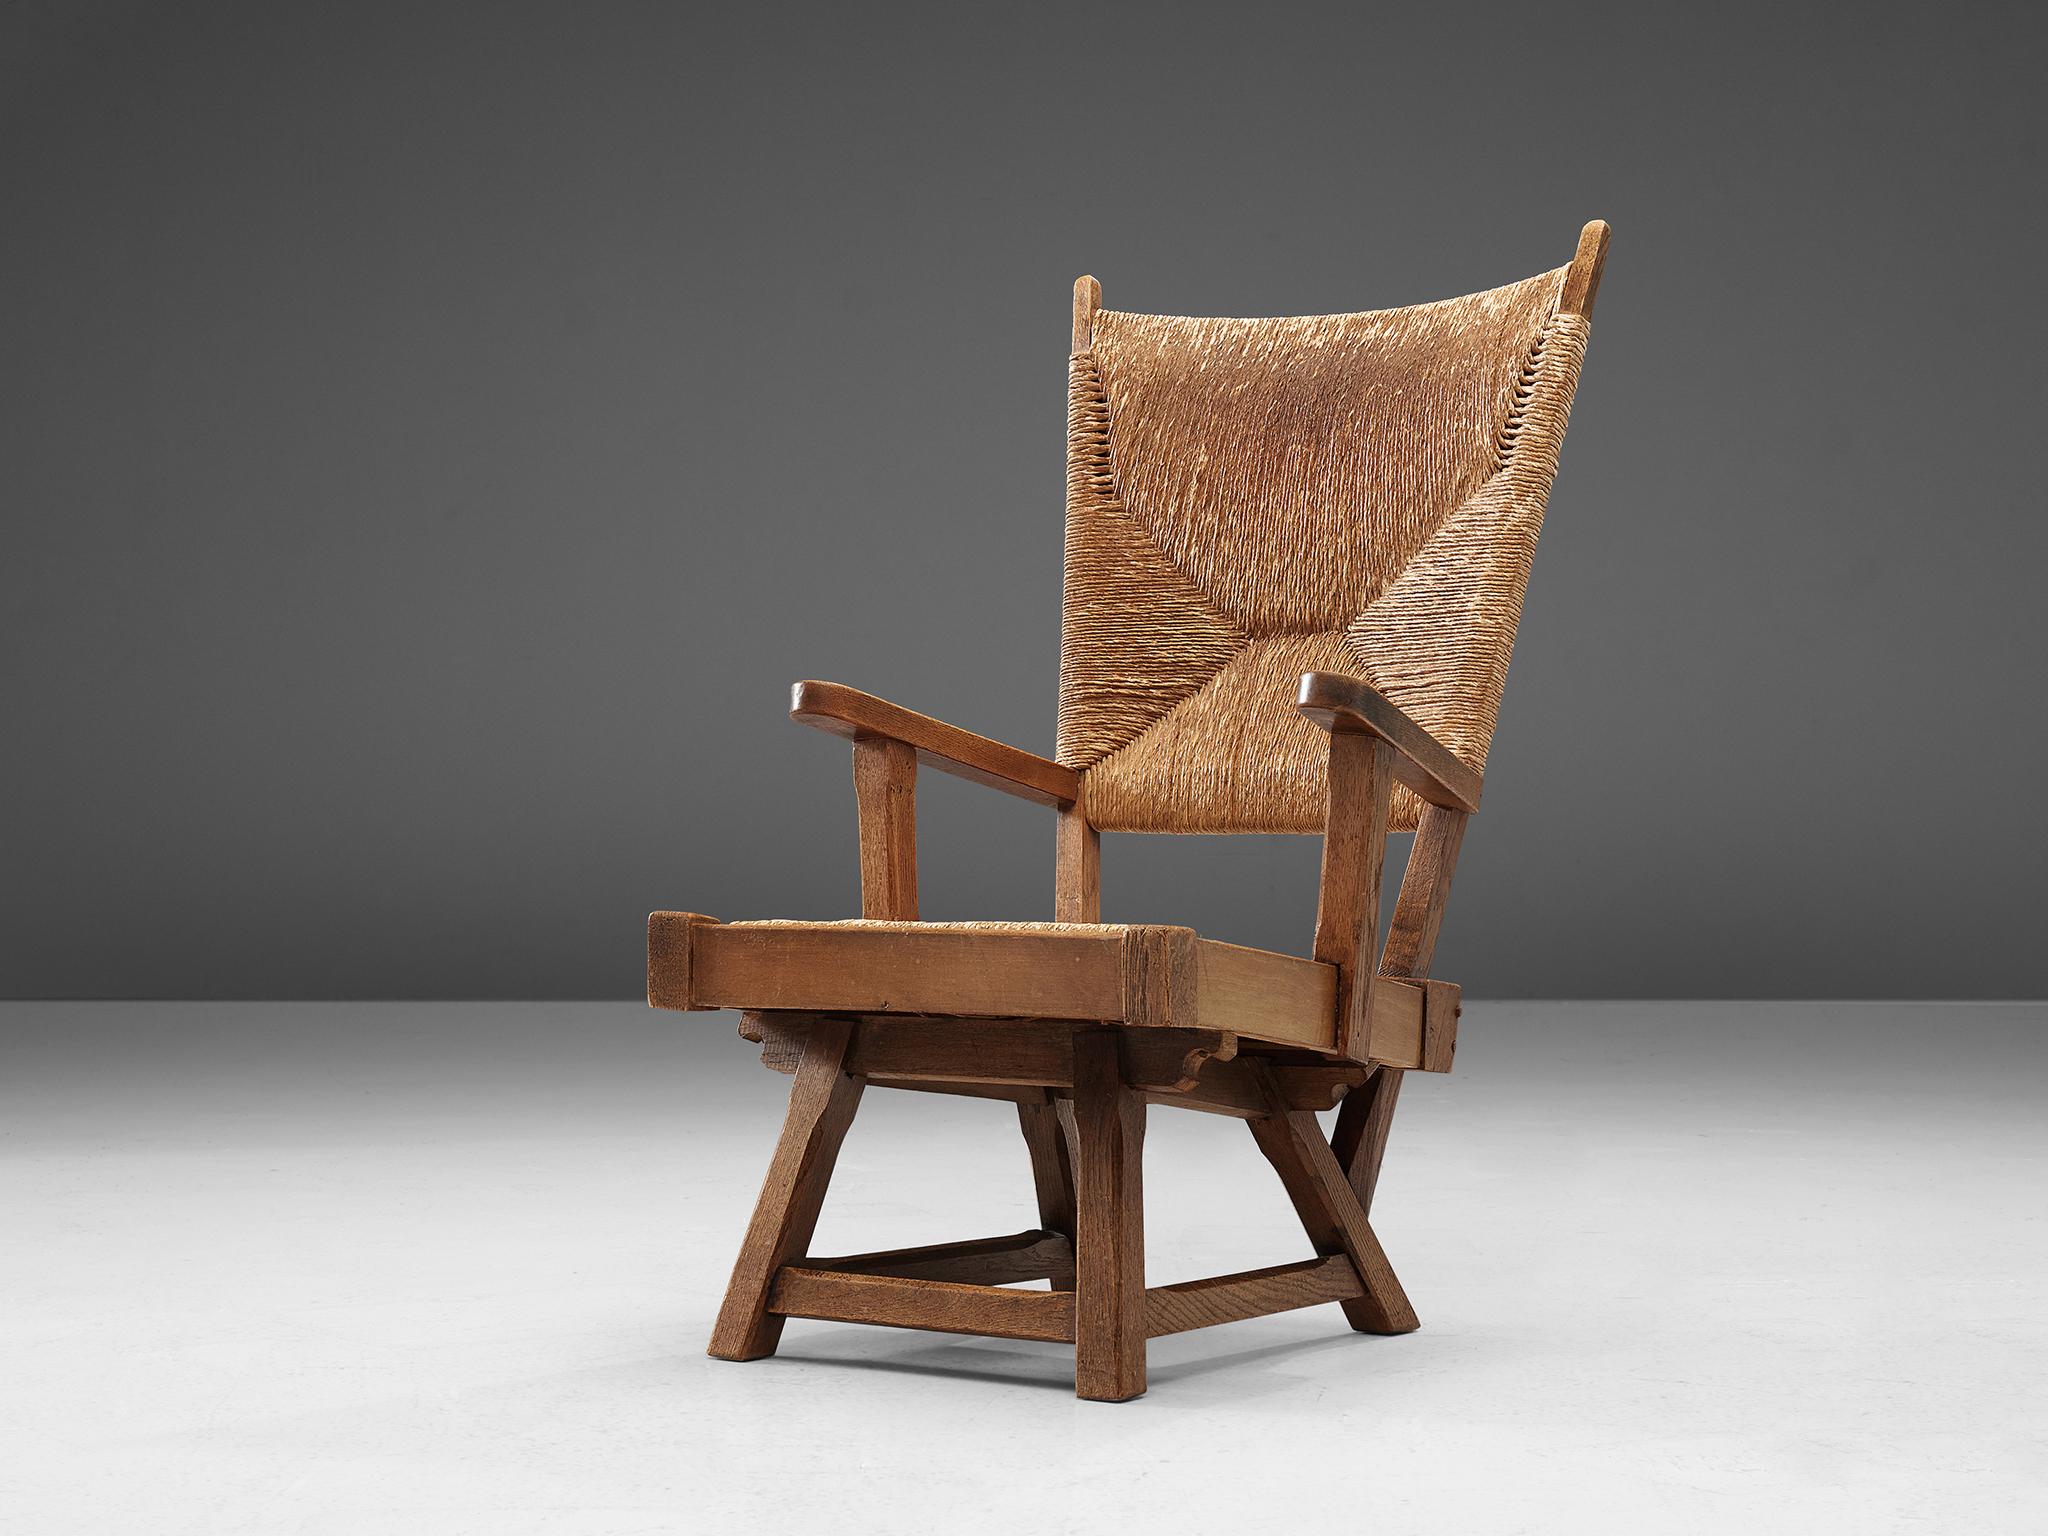 Wicker amchair, oak and cane, Netherlands, 1930s. 

This robust chair has a warm but regal character because of its high back. The frame with tilted seating, executed in a centered woven cane pattern, insures comfort for the sitter. The exposed